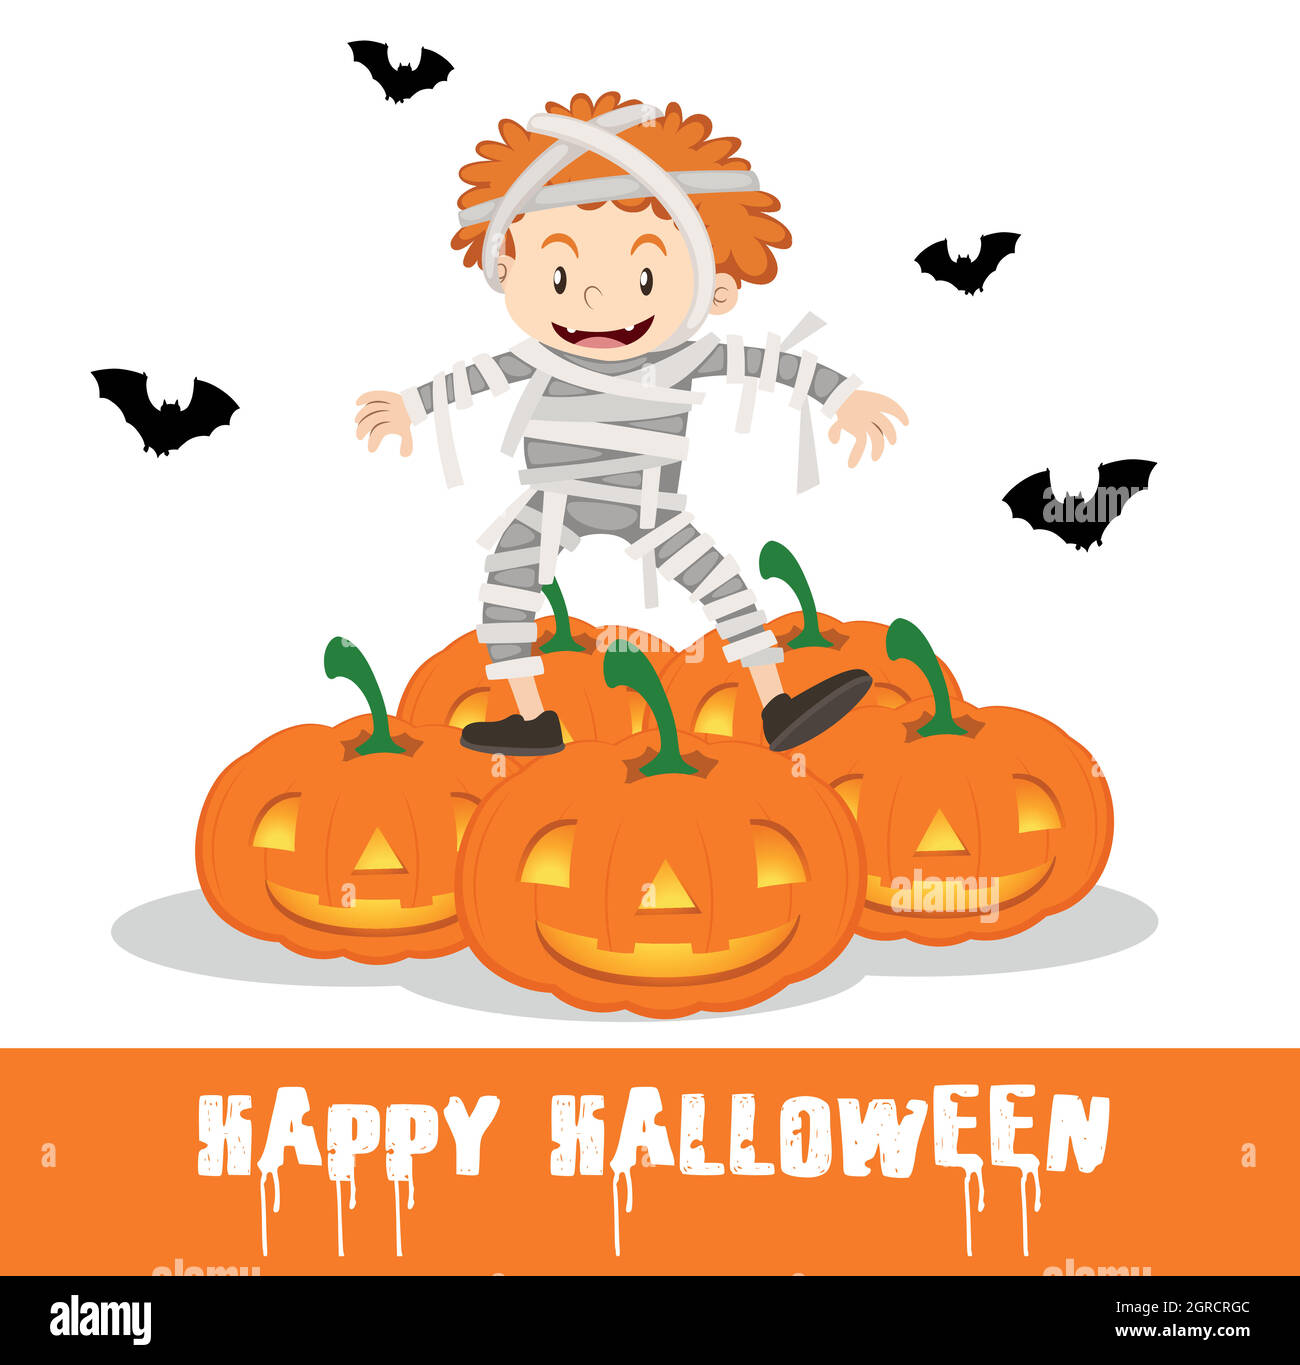 Happy Halloween poster with kid in mummy costume Stock Vector